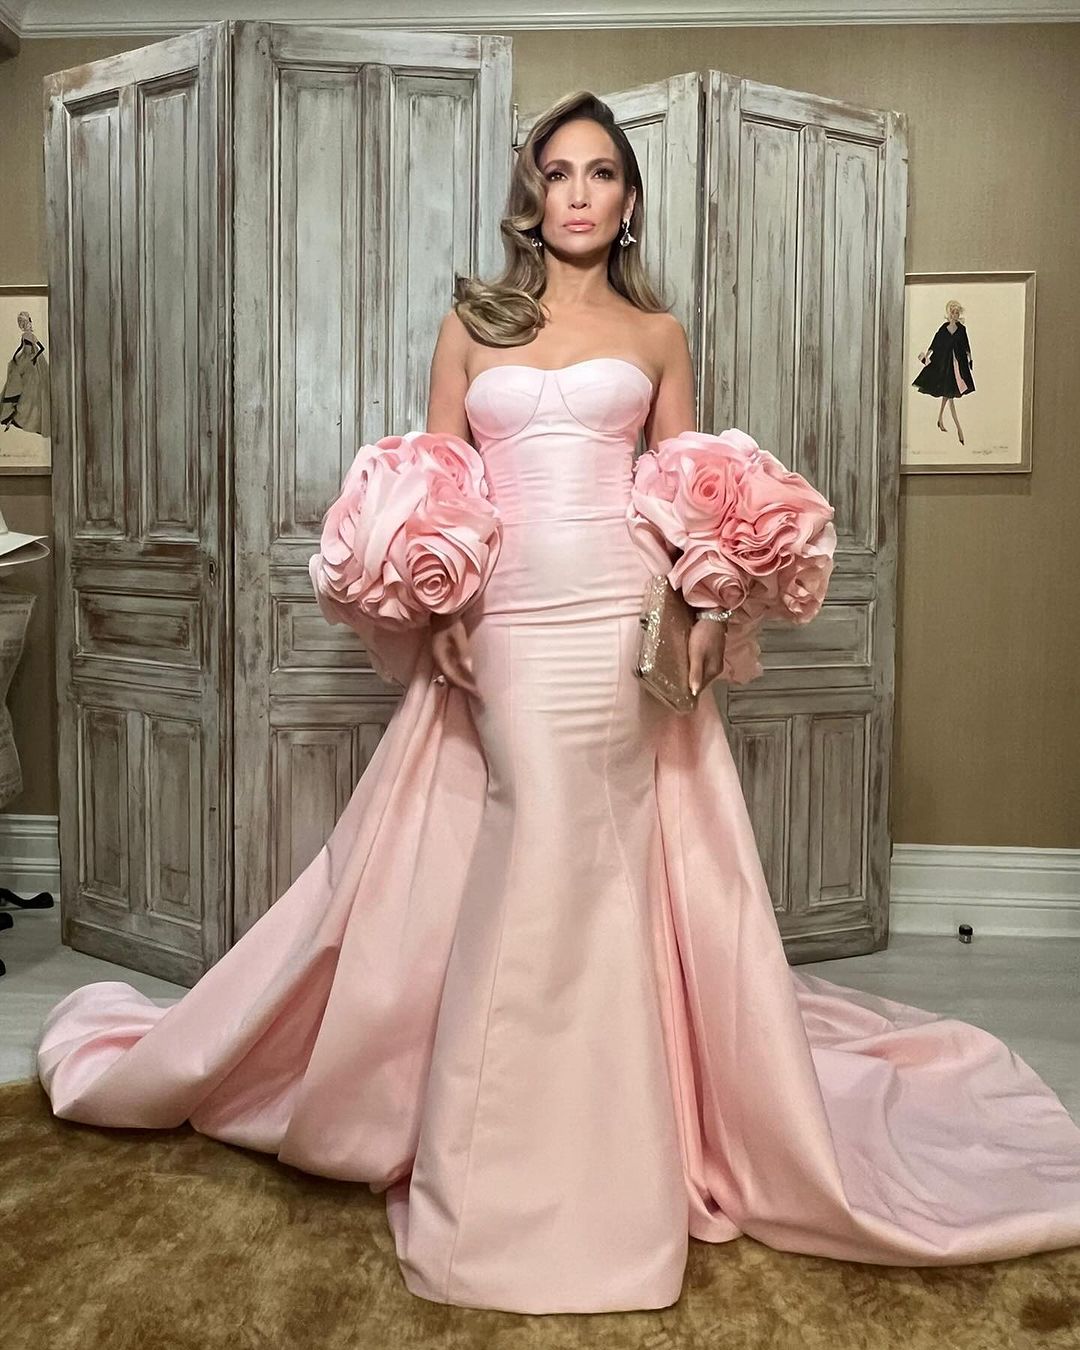 Jennifer Lopez wows in blooming Barbie-pink dress at 2024 Golden